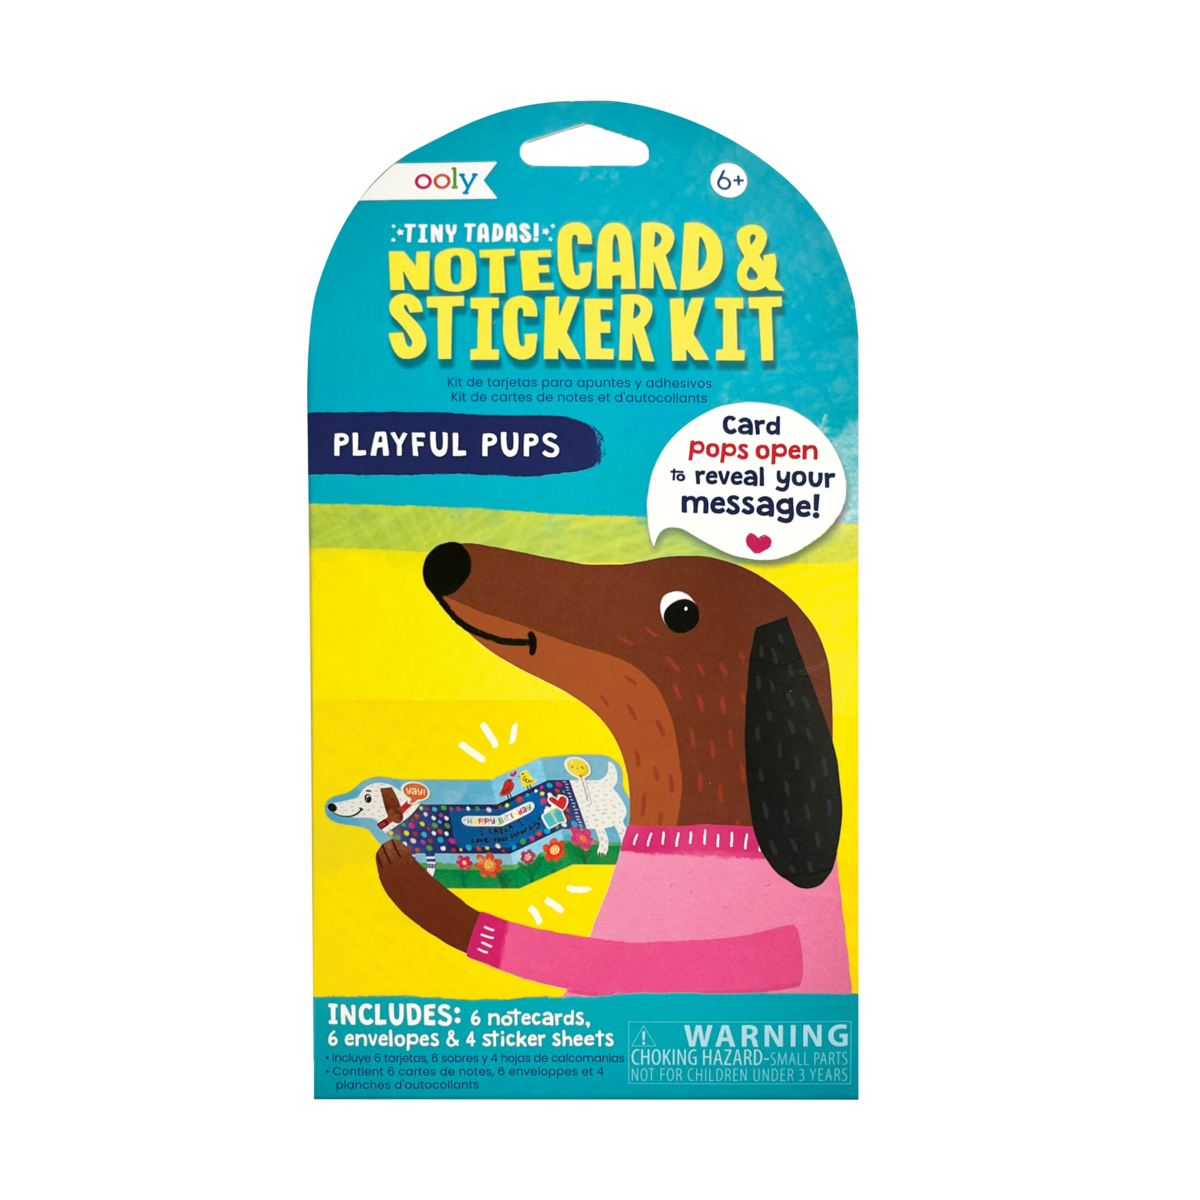 Tiny Tada! Playful Pups note card and sticker kit in packaging